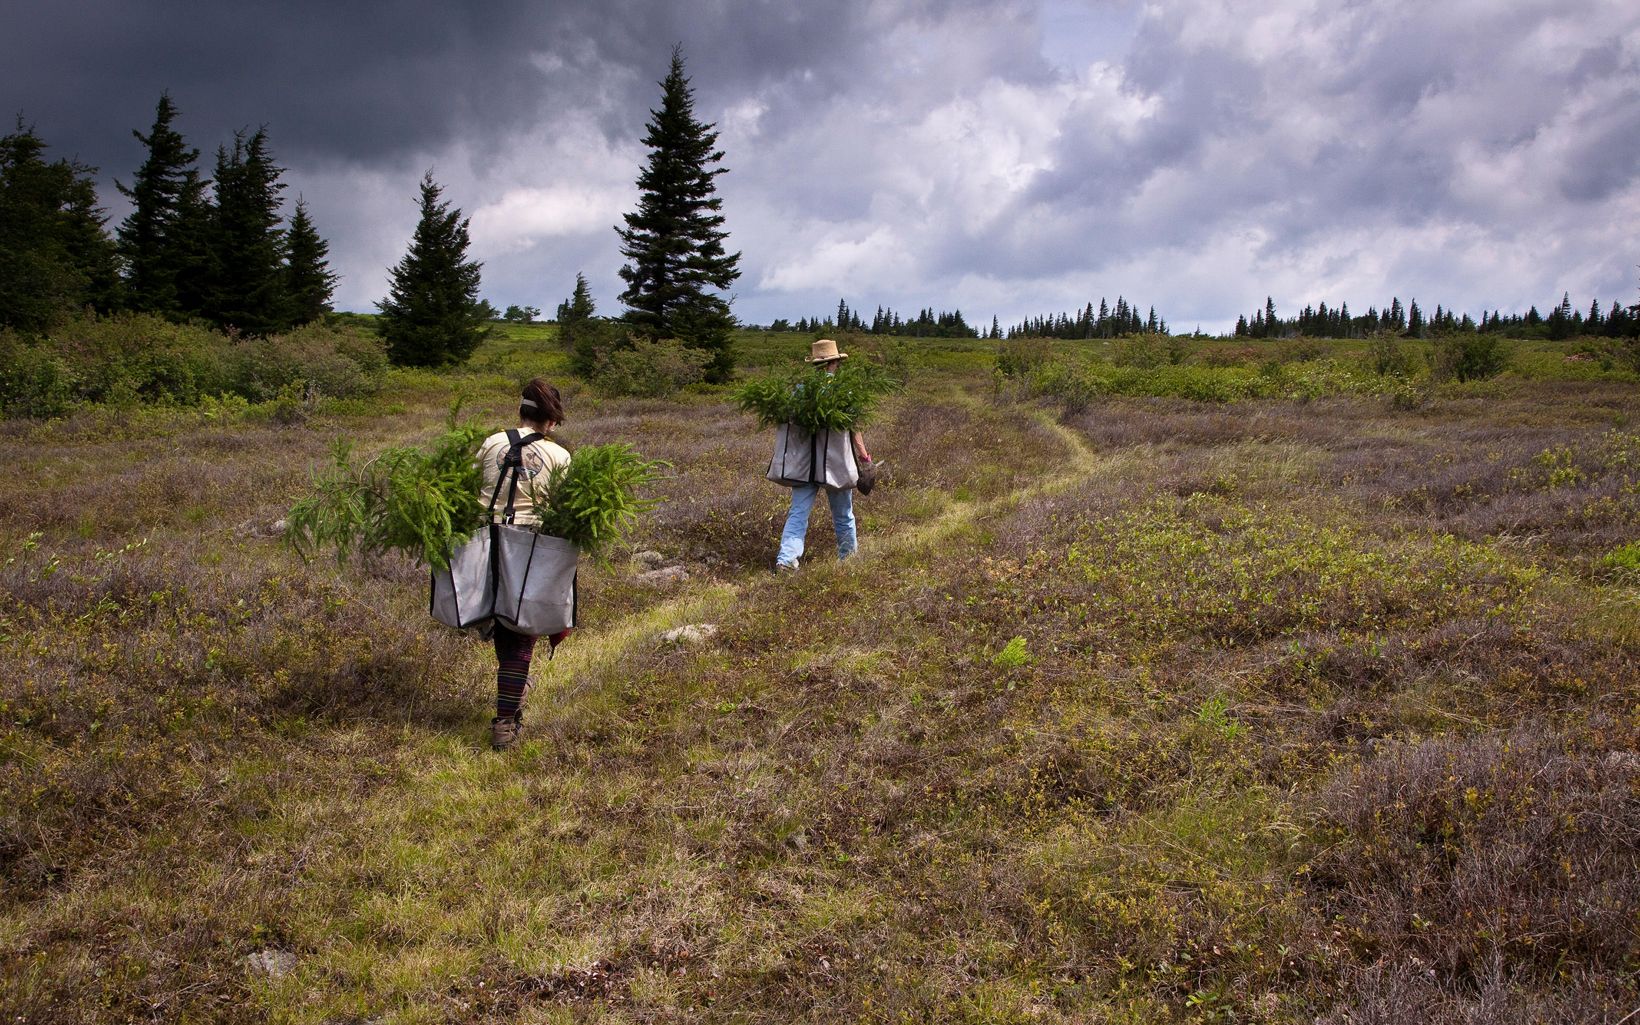 Two people on a trail, carrying bags full of tree seedlings.